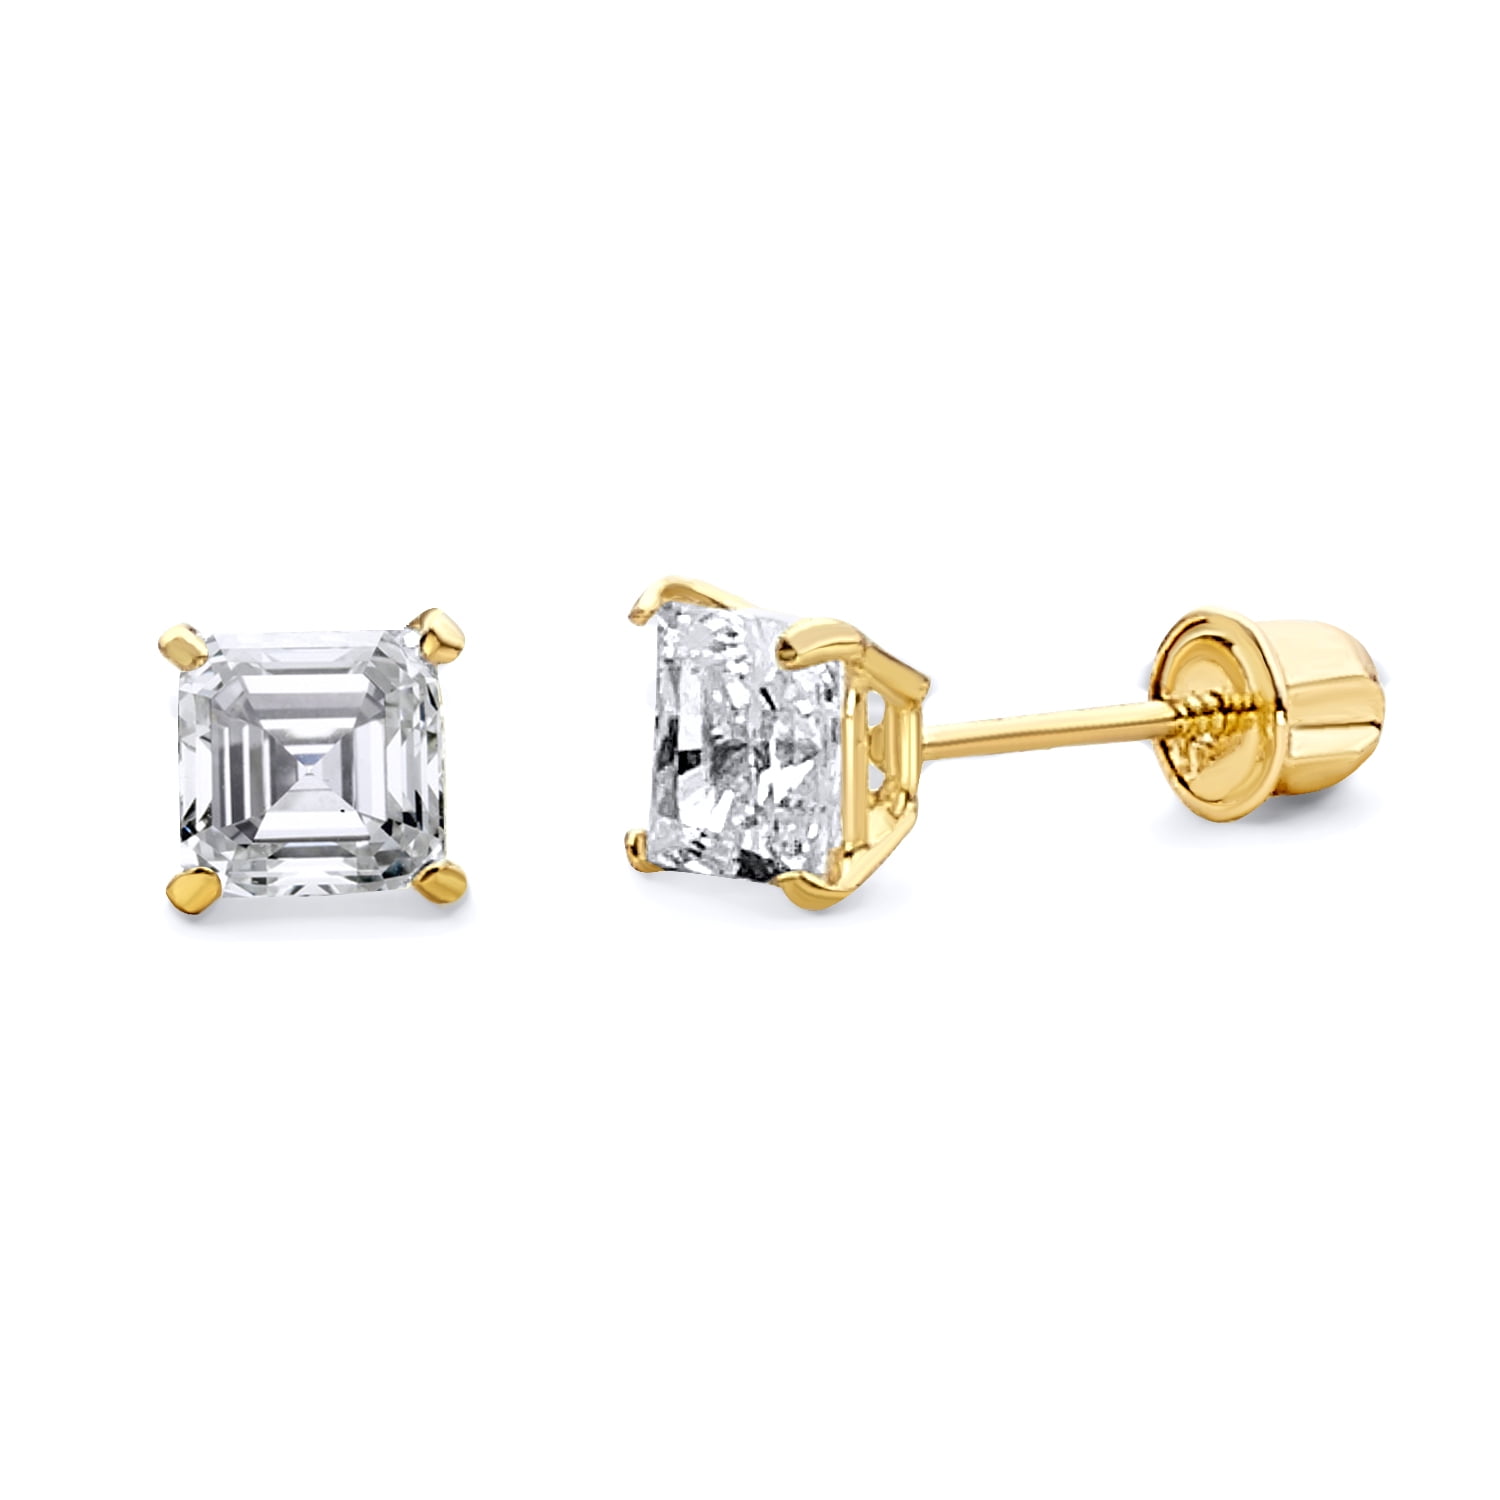 Wellingsale 14K Yellow Gold Polished 6mm Princess Solitaire Basket Style Prong Set Stud Earrings With Silicone Back